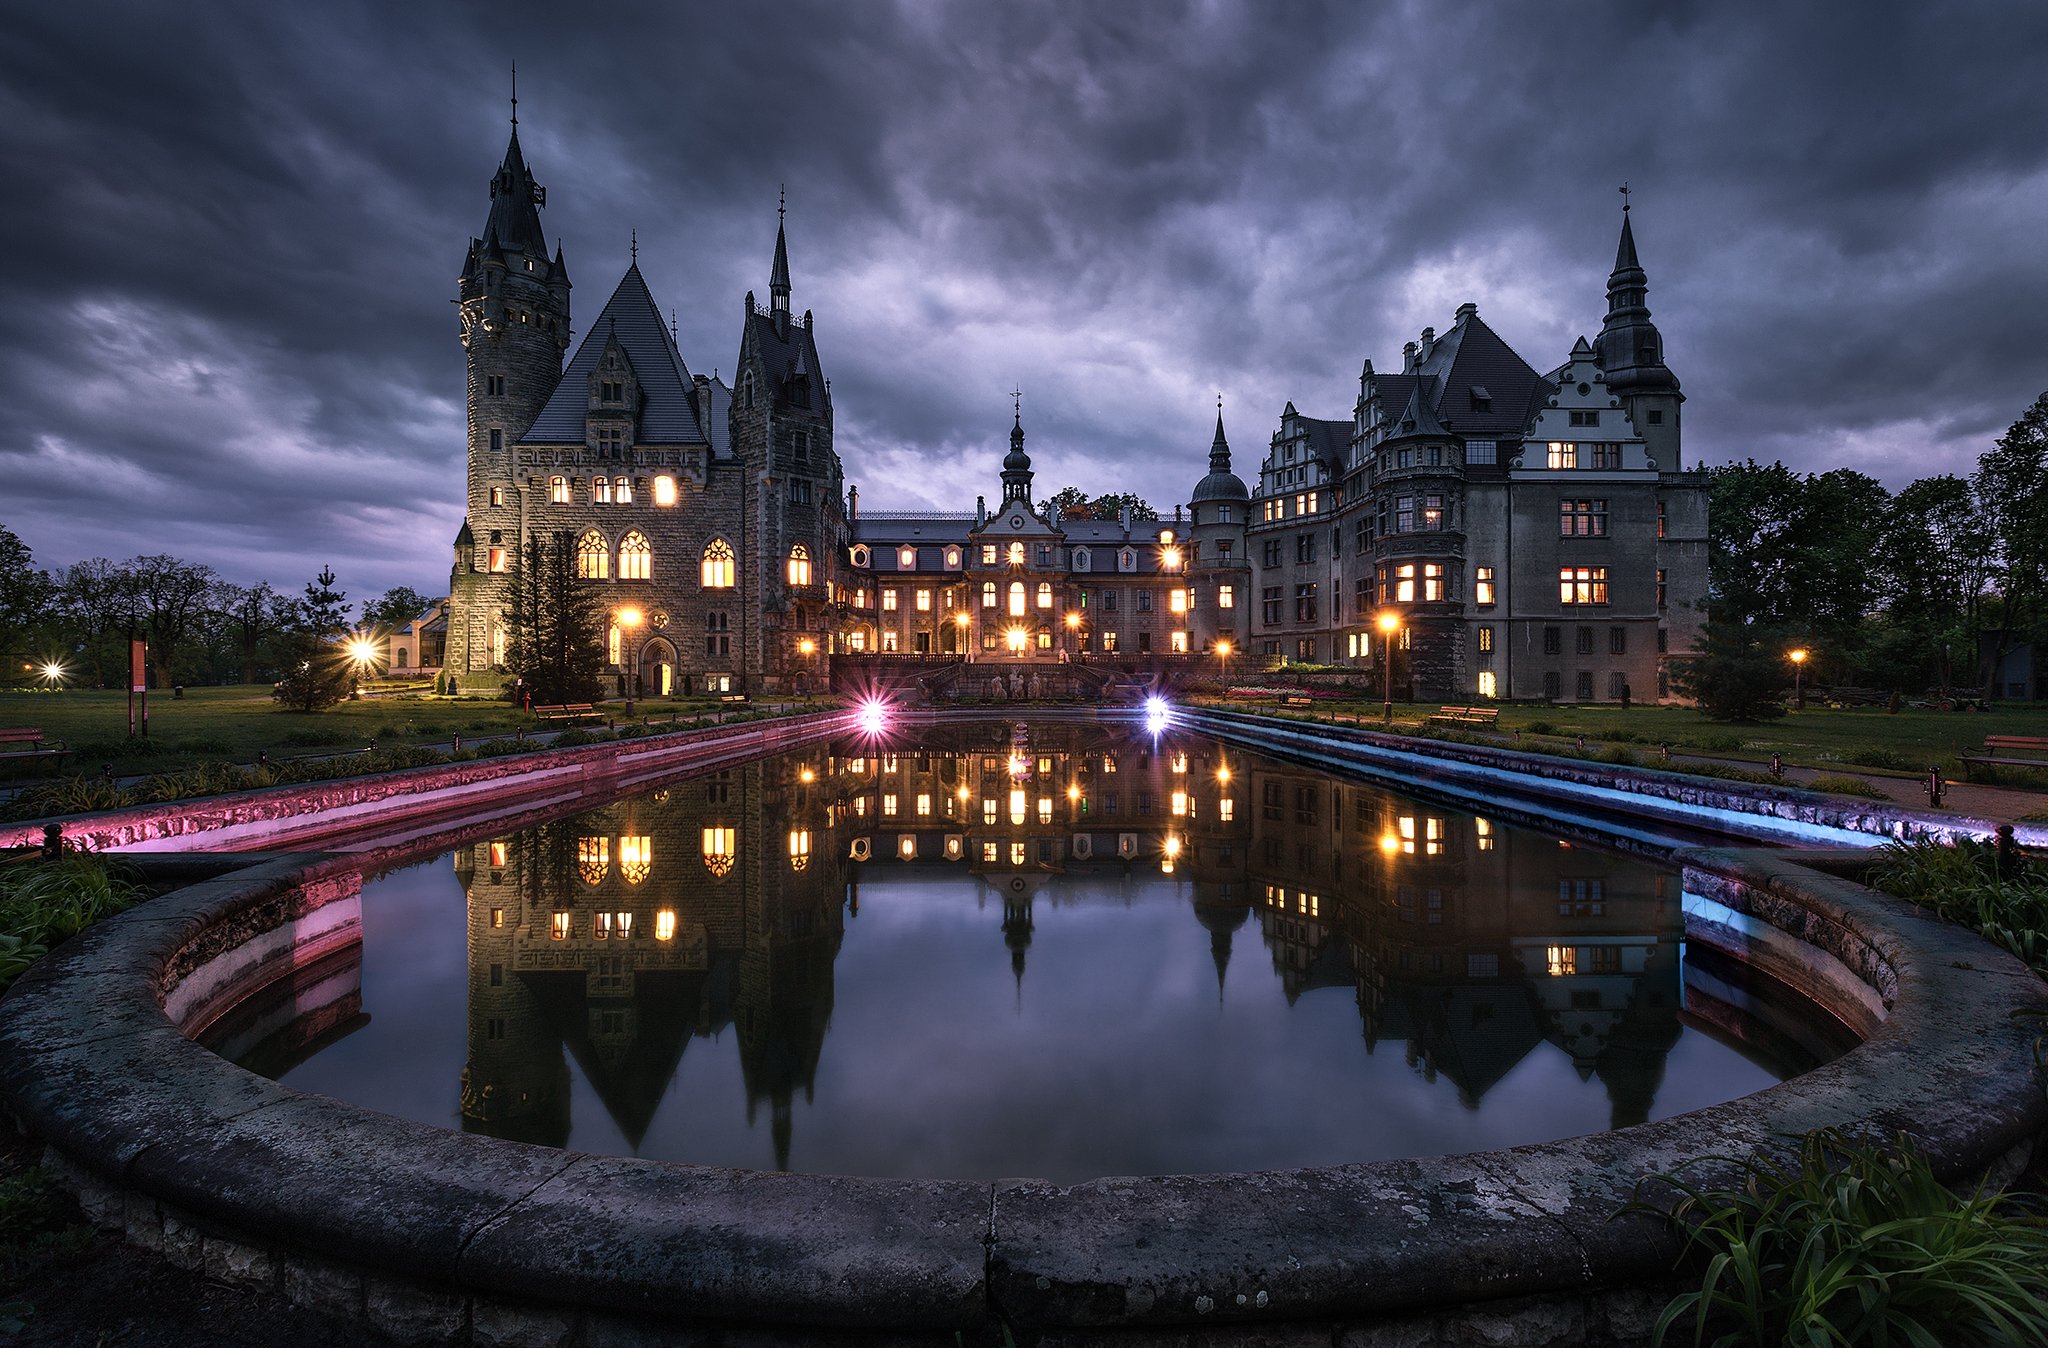 General 2048x1348 water reflection HDR photography night overcast Poland Moszna Castle bench lights Pawel Olejniczak